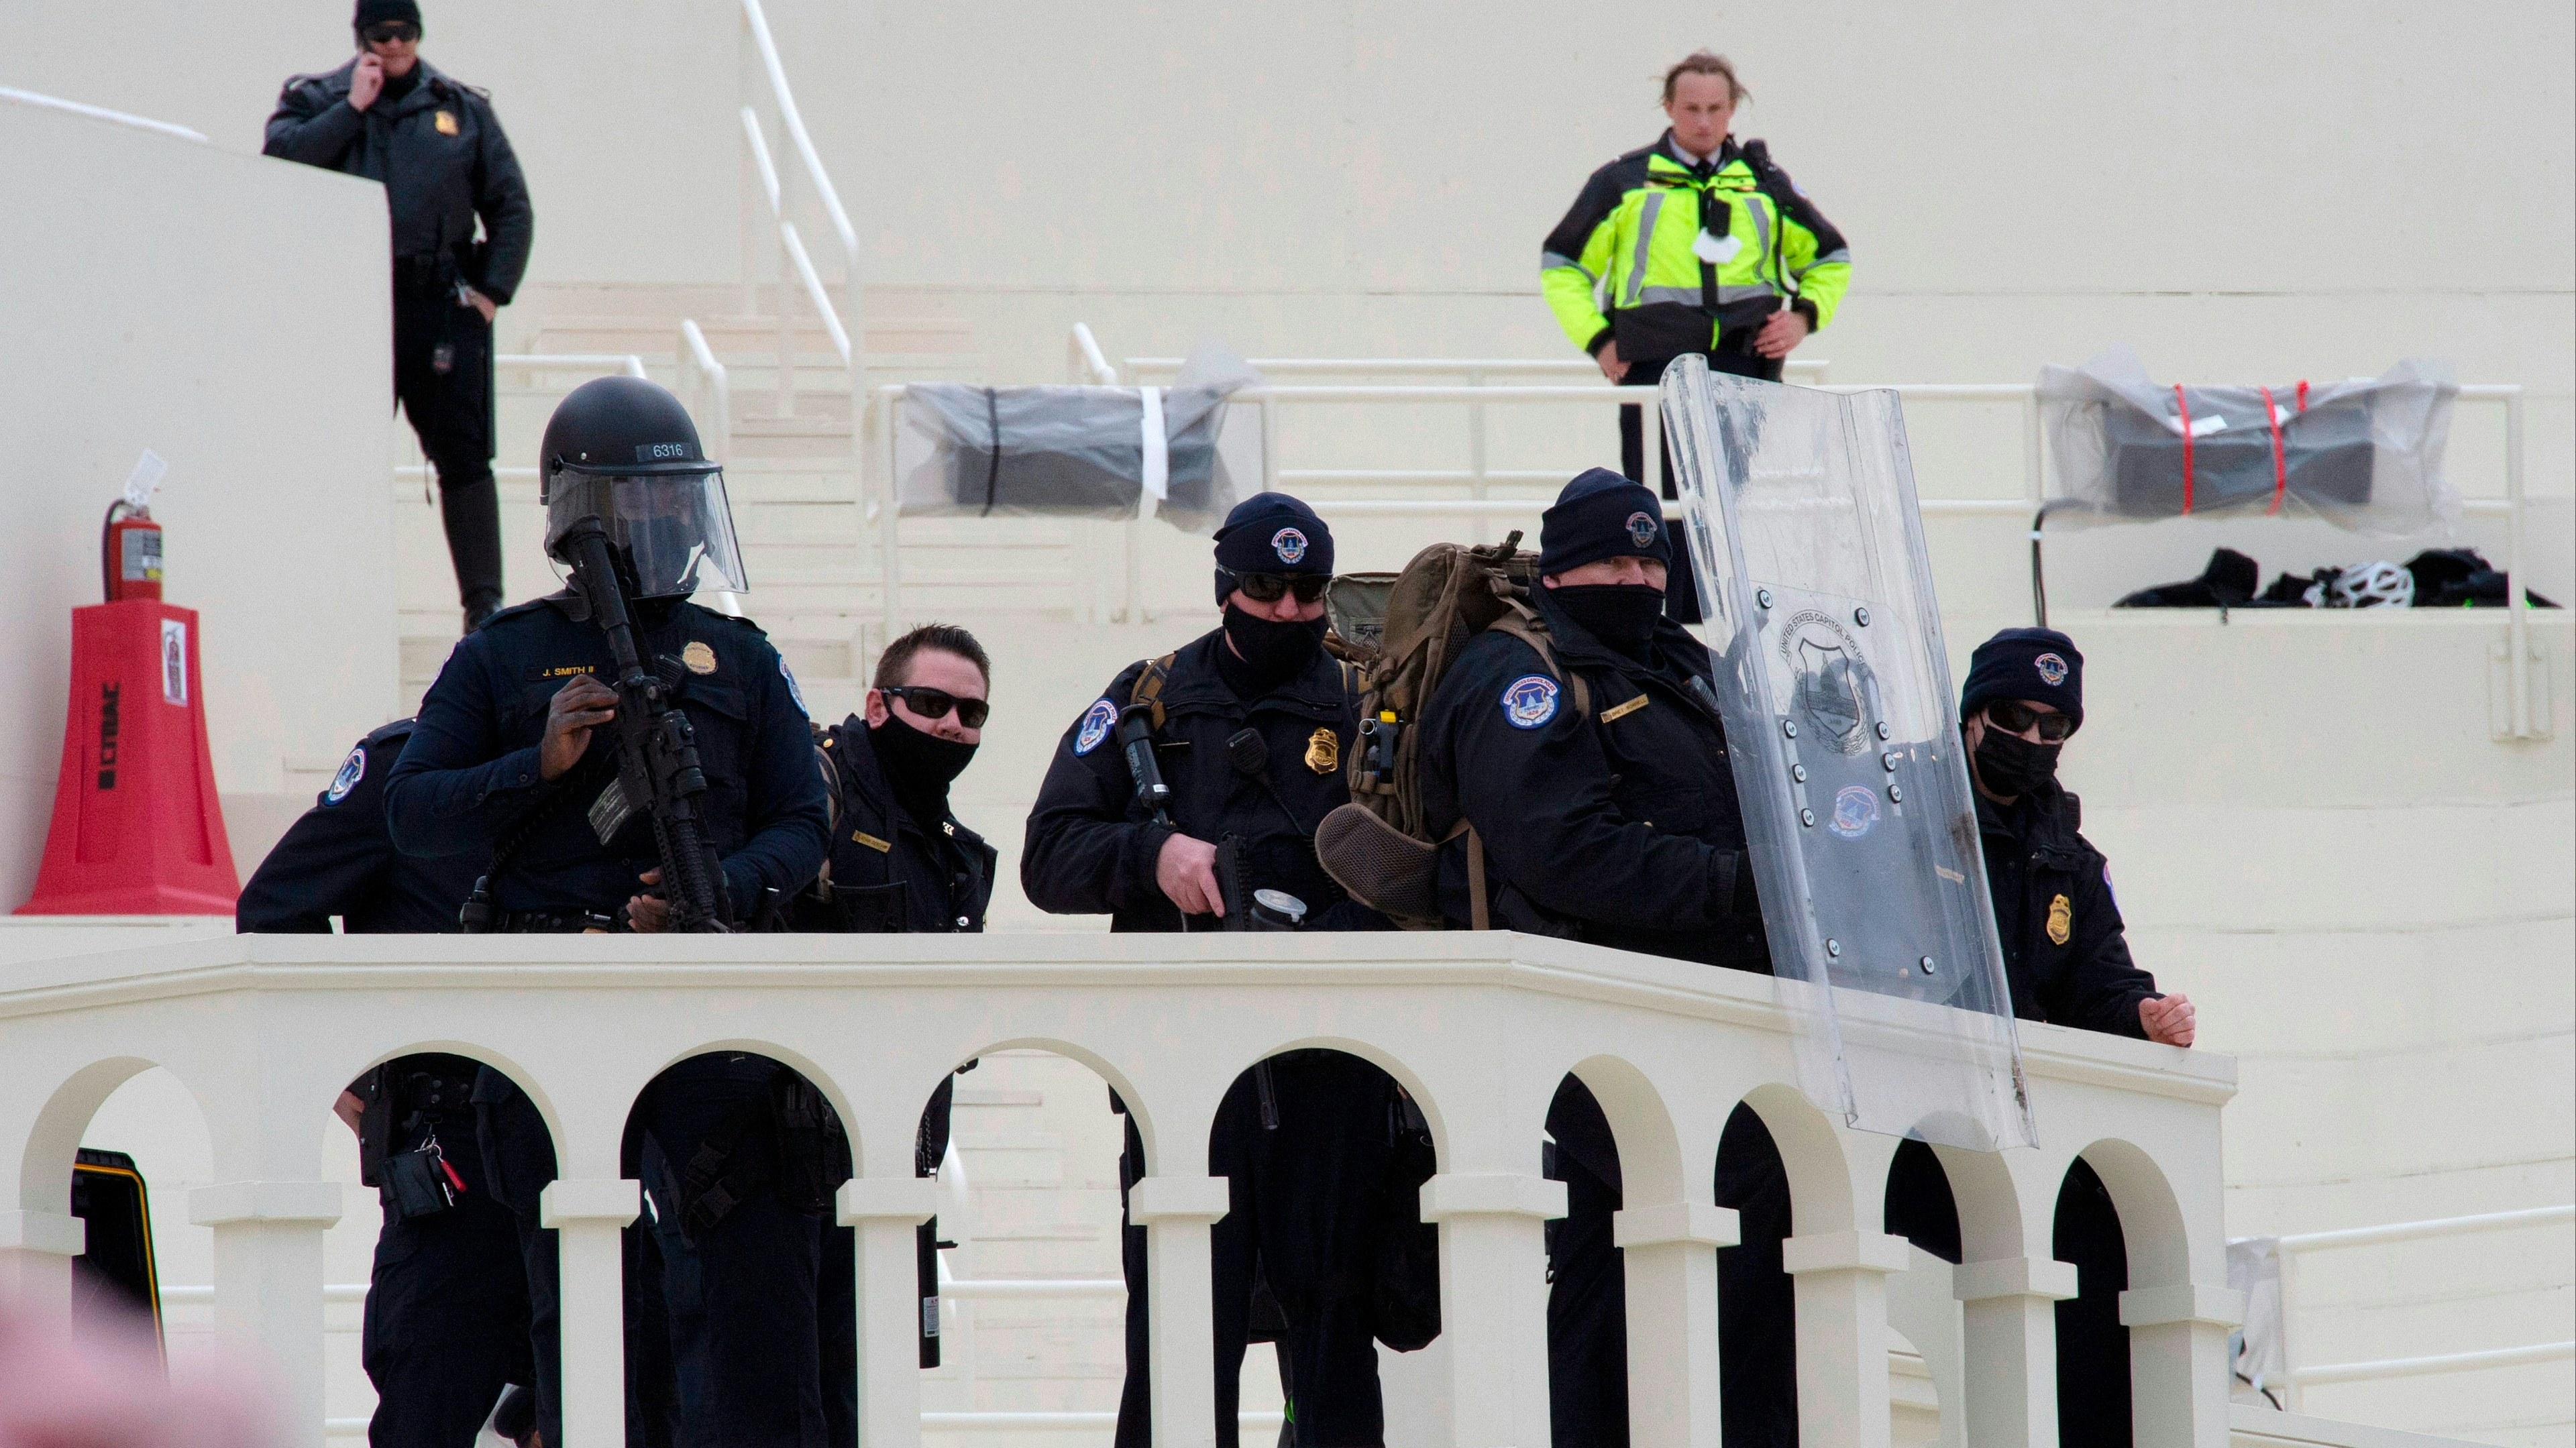 Police watch as protesters surround the US Capitol Building and begin to storm it after a rally in support of US President Donald Trump in Washington, DC on January 6, 2021.